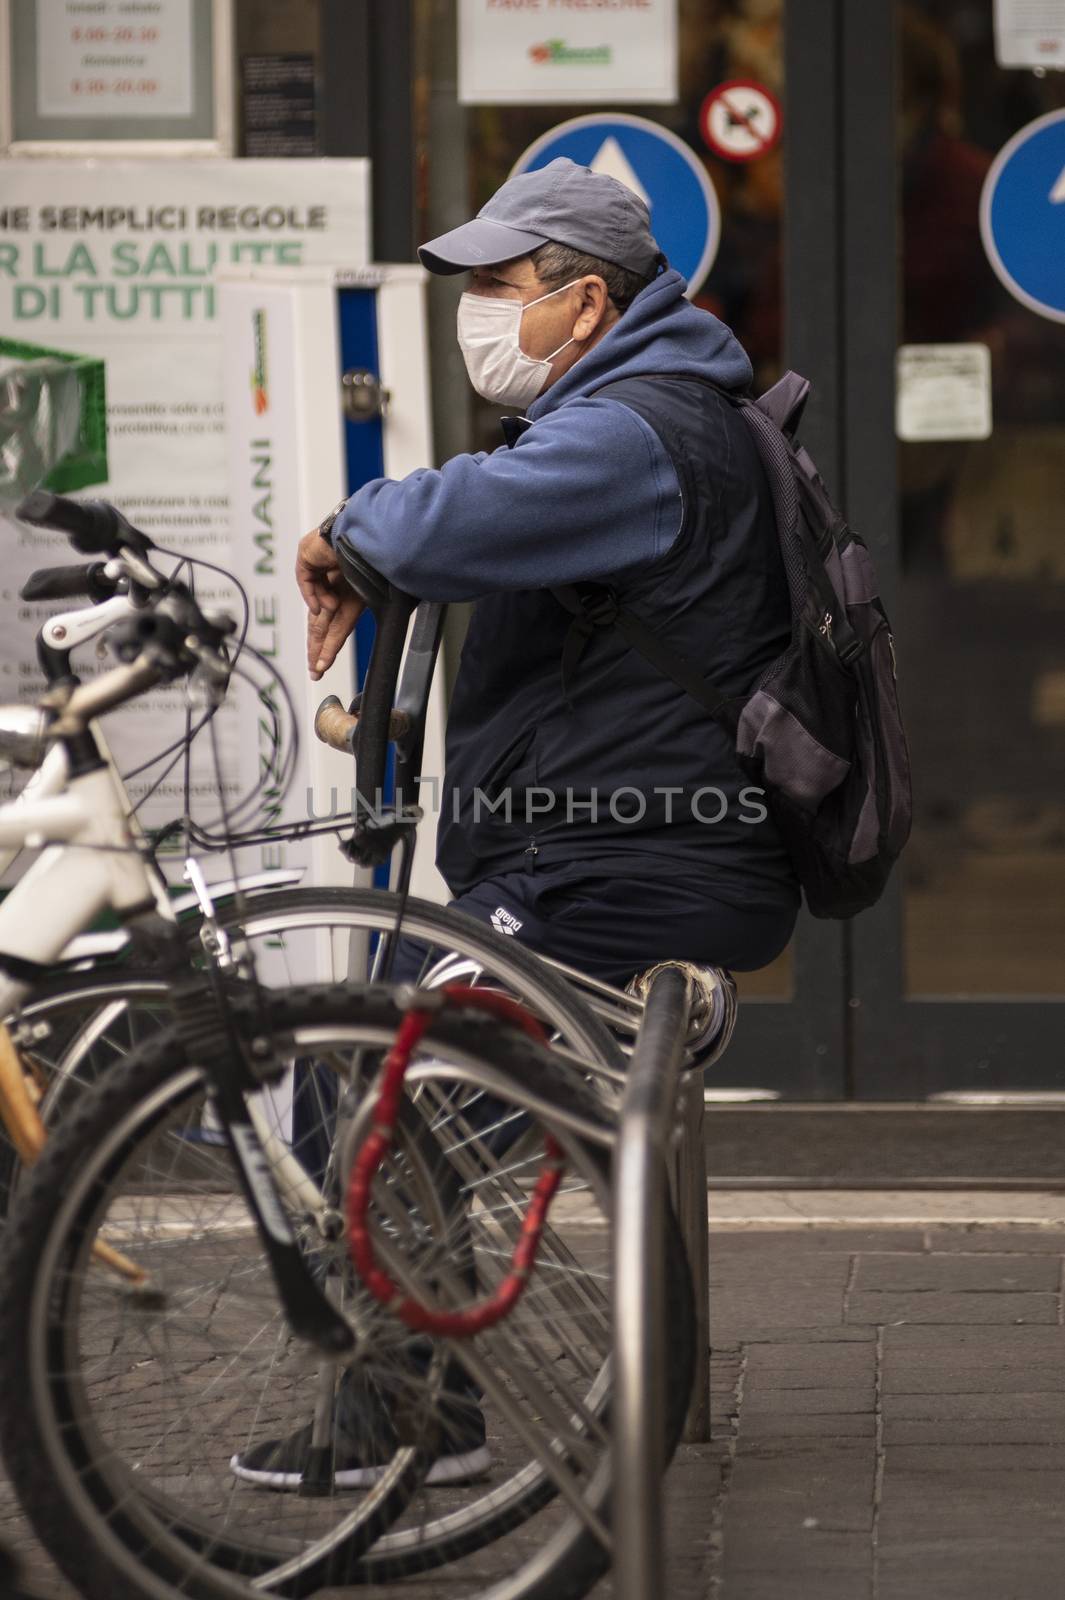 terni,italy october 23 2020:man sitting with medical mask leaning on a crutch